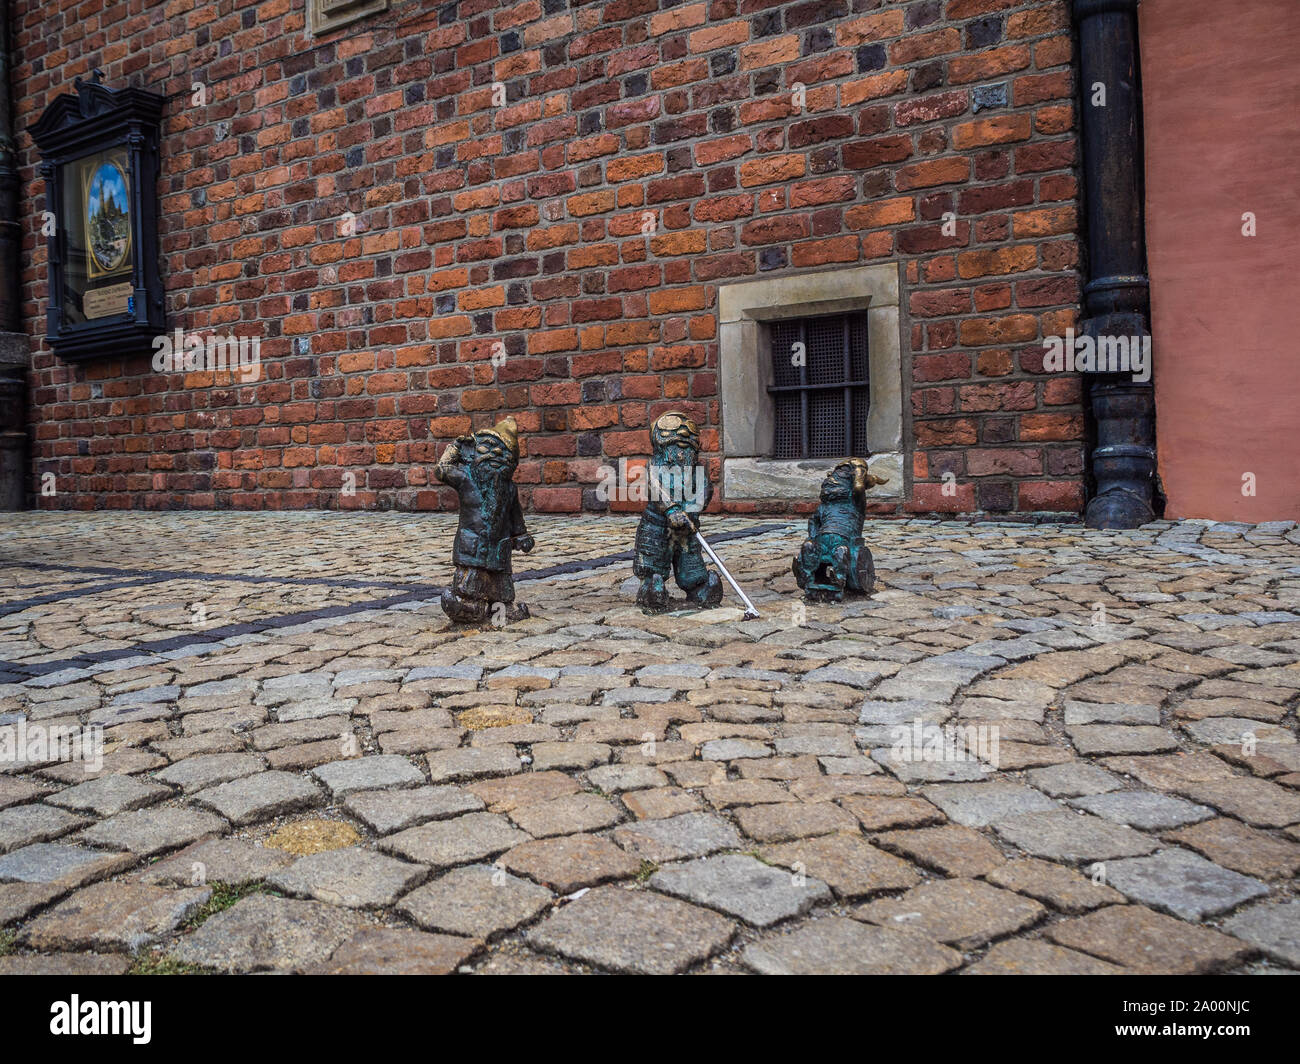 The Gnomes of Wroclaw, Poland Stock Photo